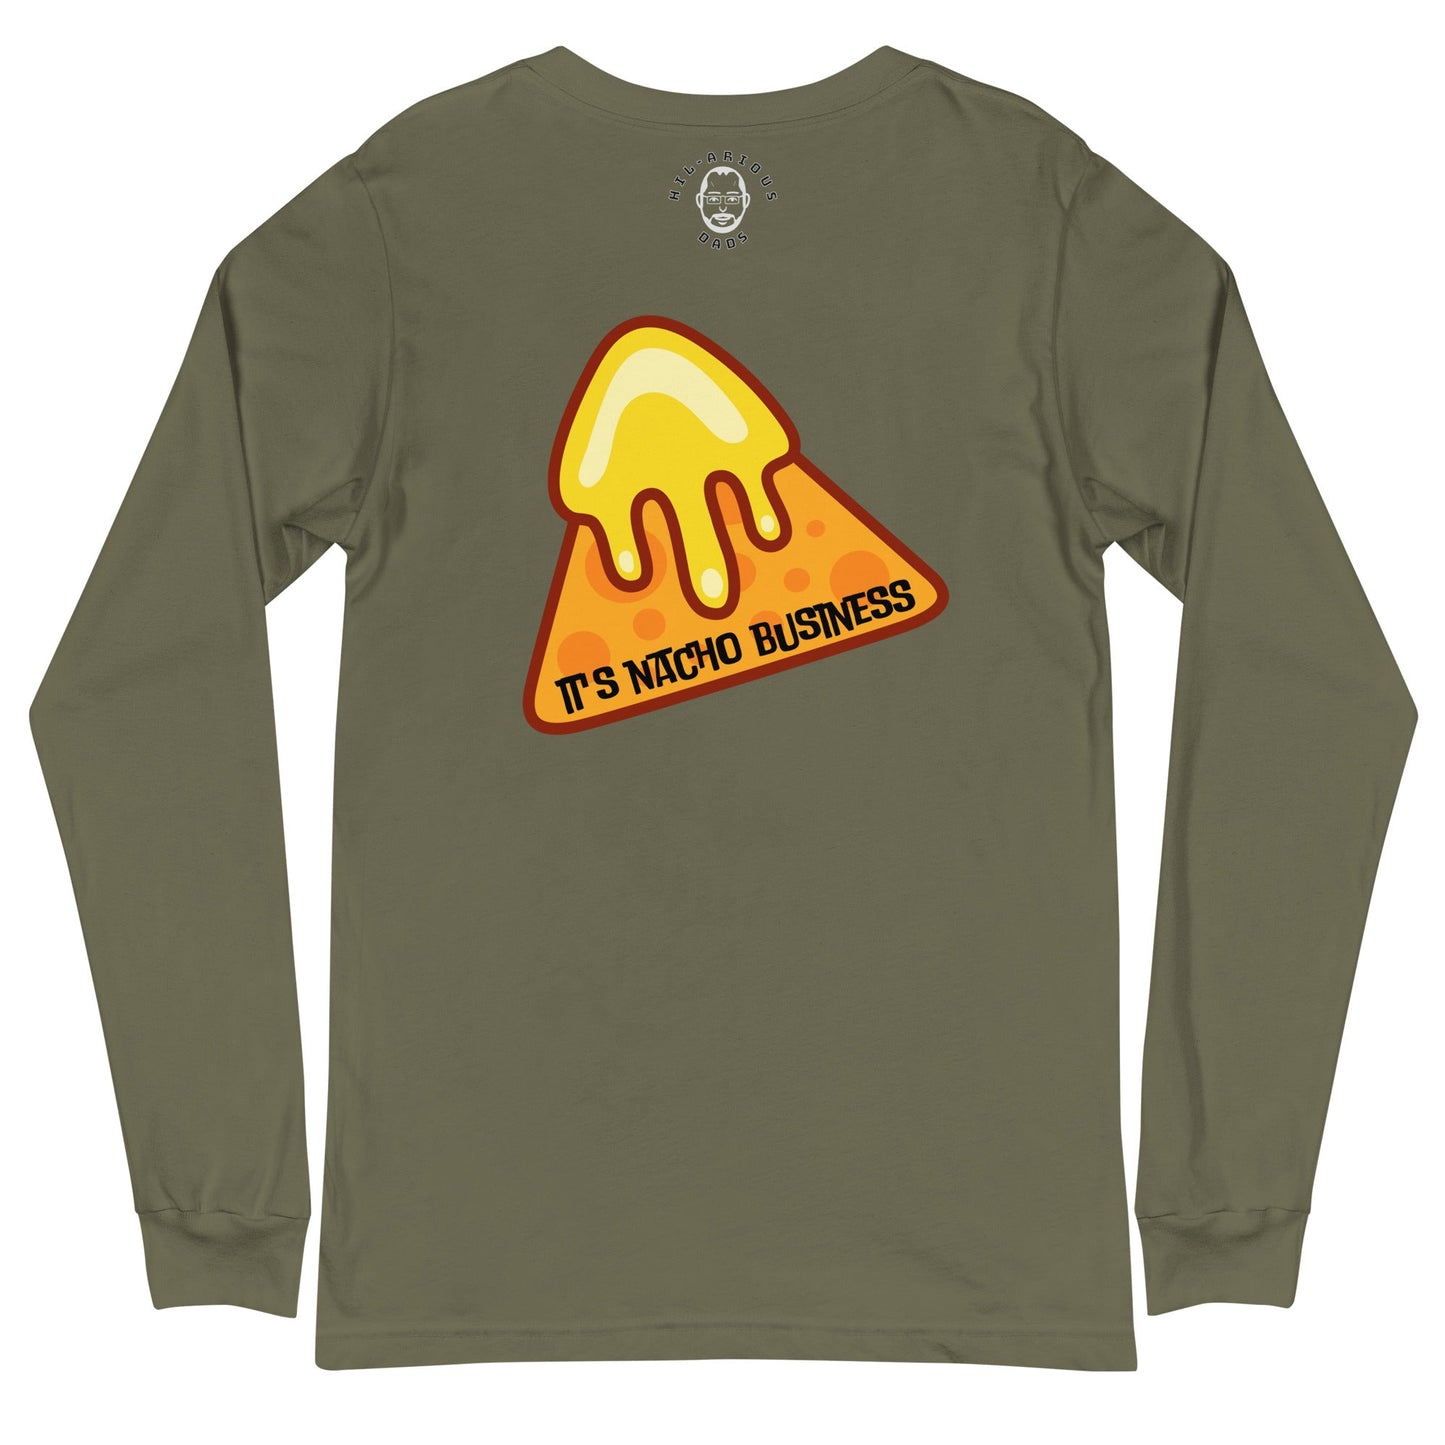 How much Mexican food do I plan to eat this Cinco De Mayo, you ask?-Long Sleeve Tee - Hil-arious Dads